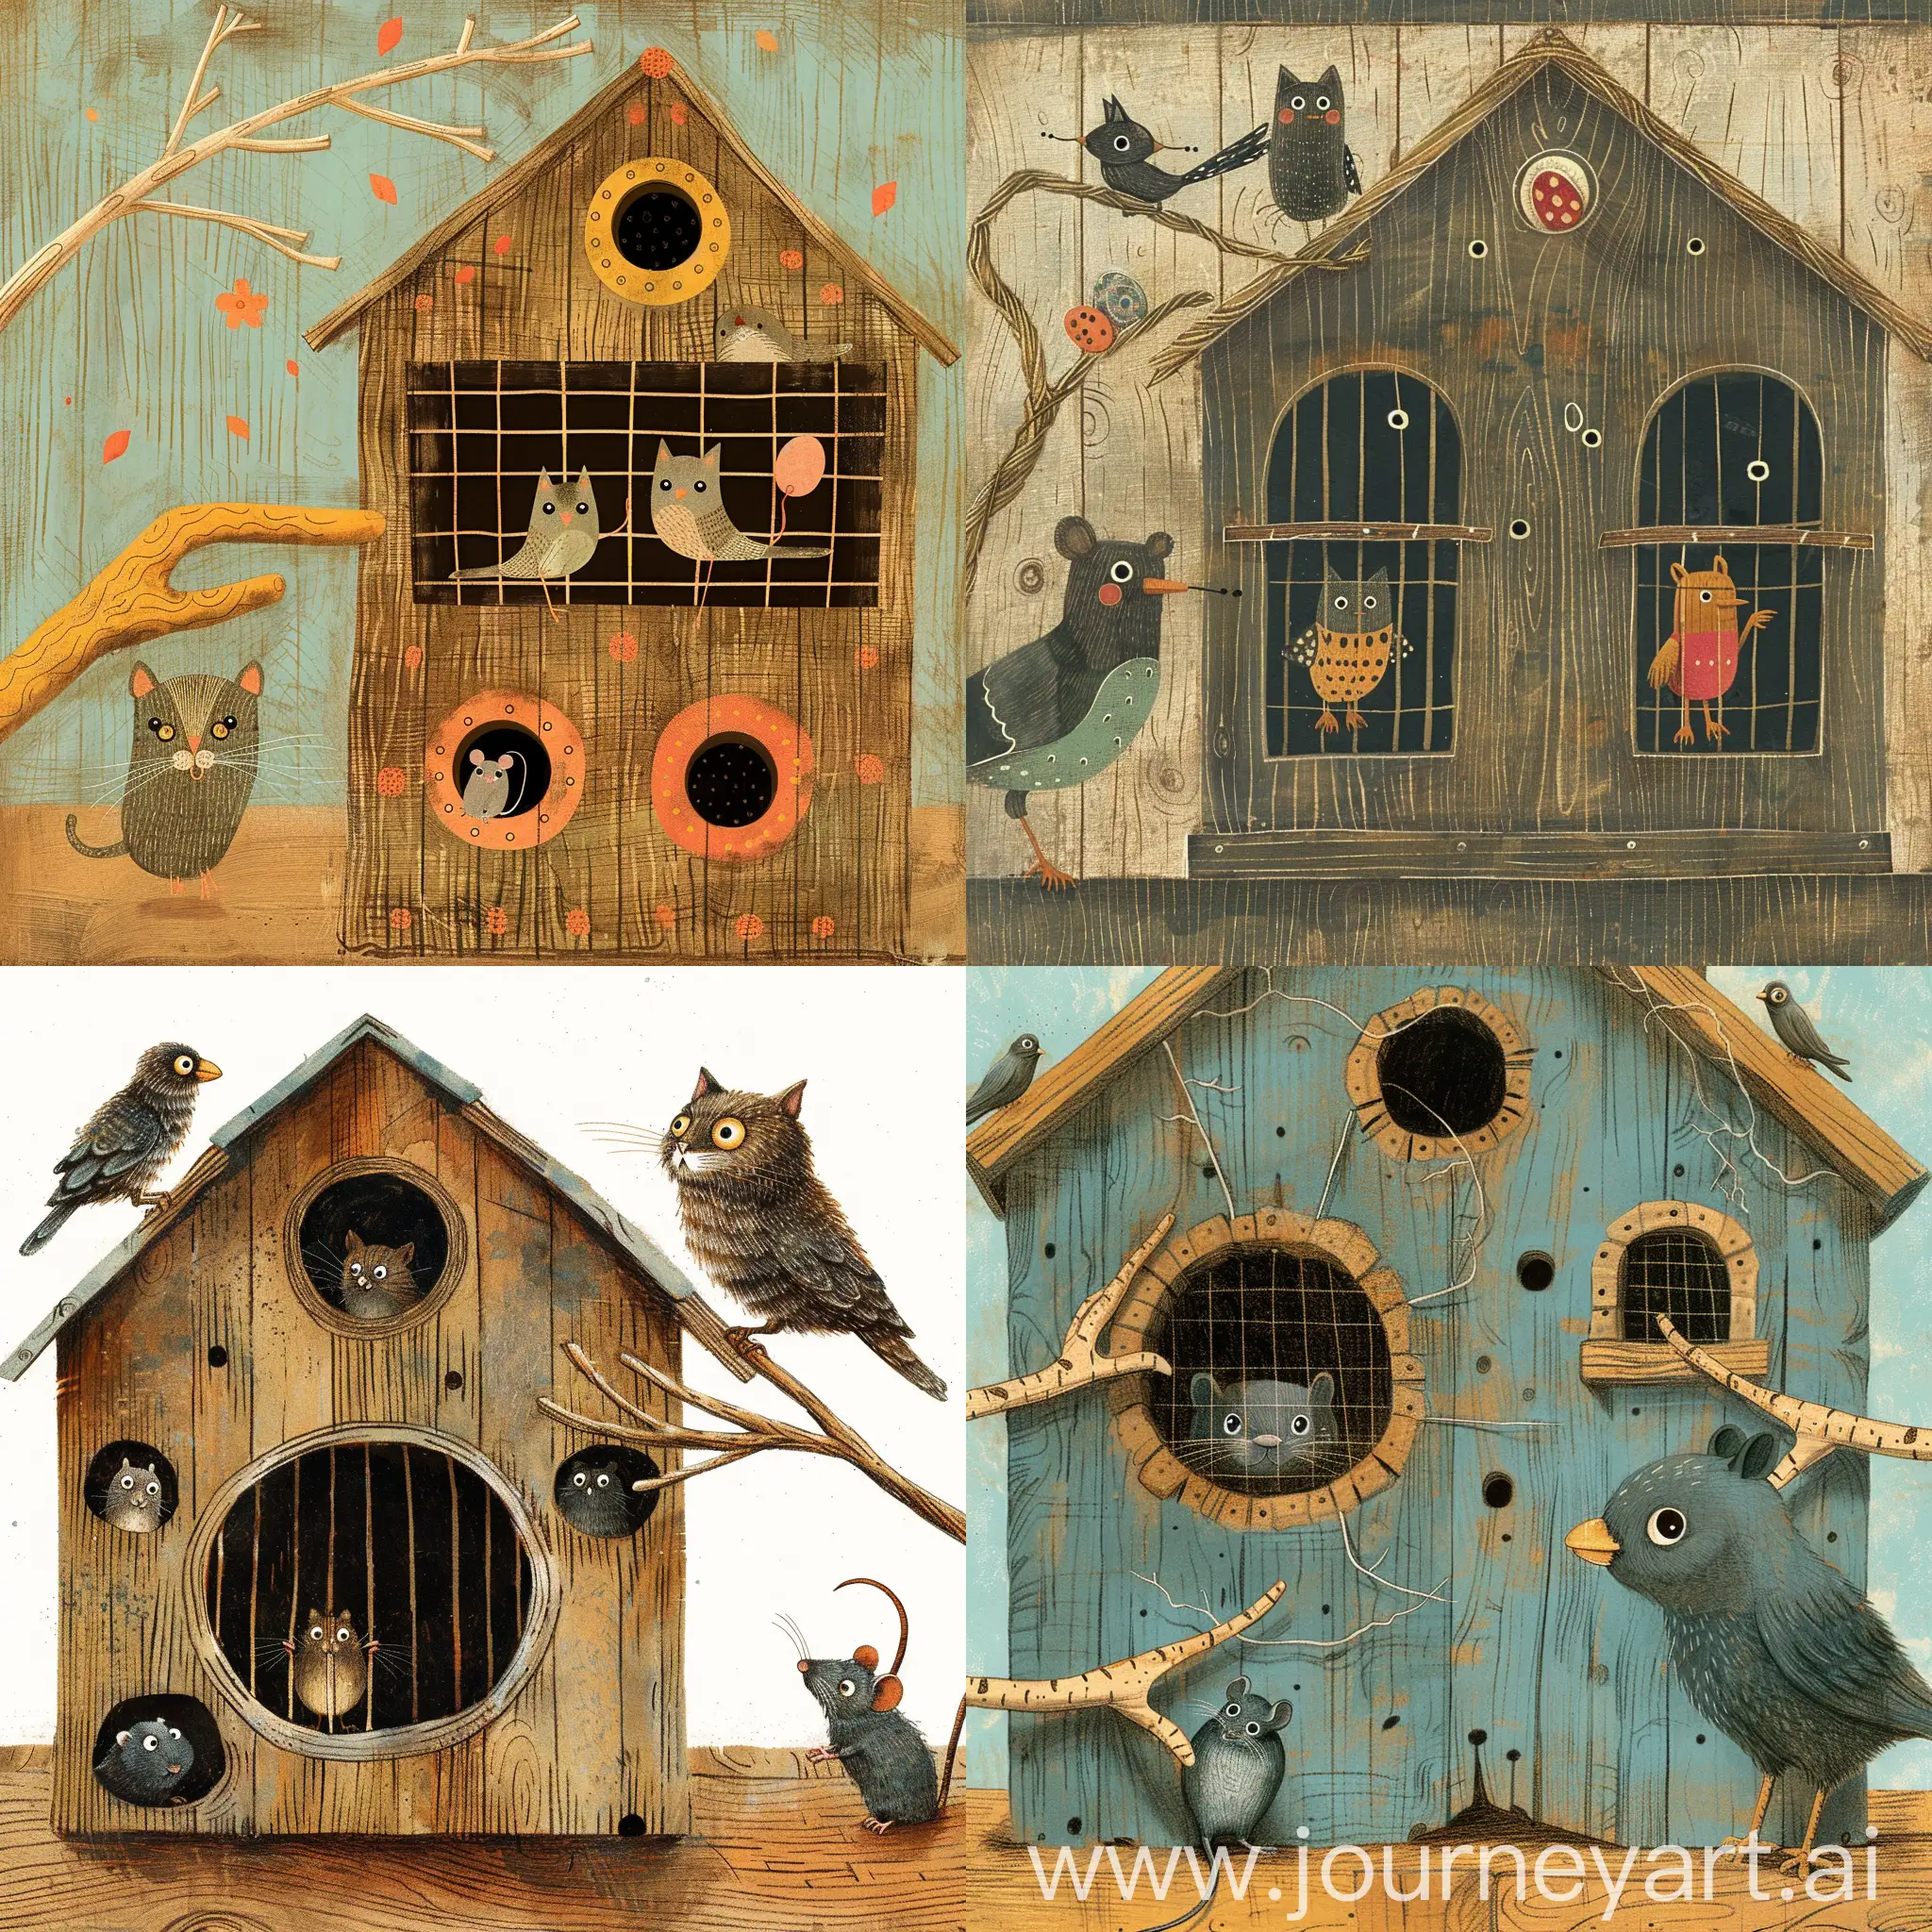 Vintage wooden house shaped birdcage with twig hands, windows and holes、Two birds peeking out from the holes, outside ((small mouse), big cat standing. Twig hand pointing to mouse (focus), simple image pattern、Hand drawn, Easter colors, abstract, cheerful, whimsical, funny, children's storybook style